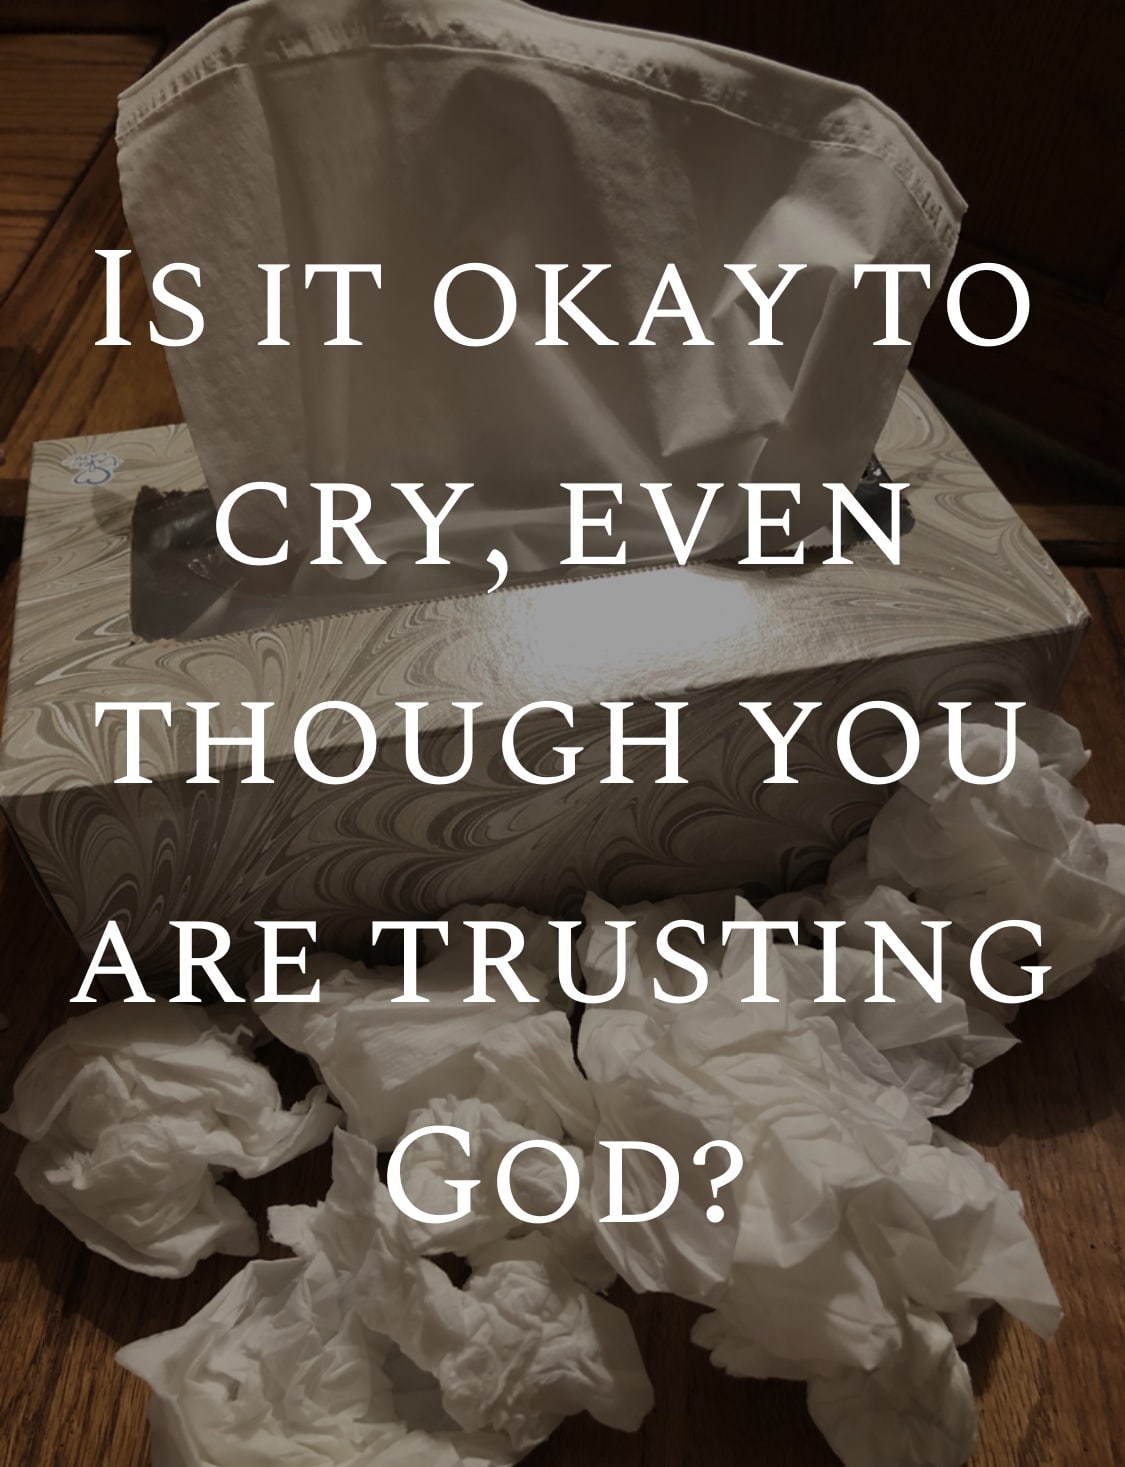 IS IT OKAY TO CRY, EVEN IF YOU ARE TRUSTING GOD?